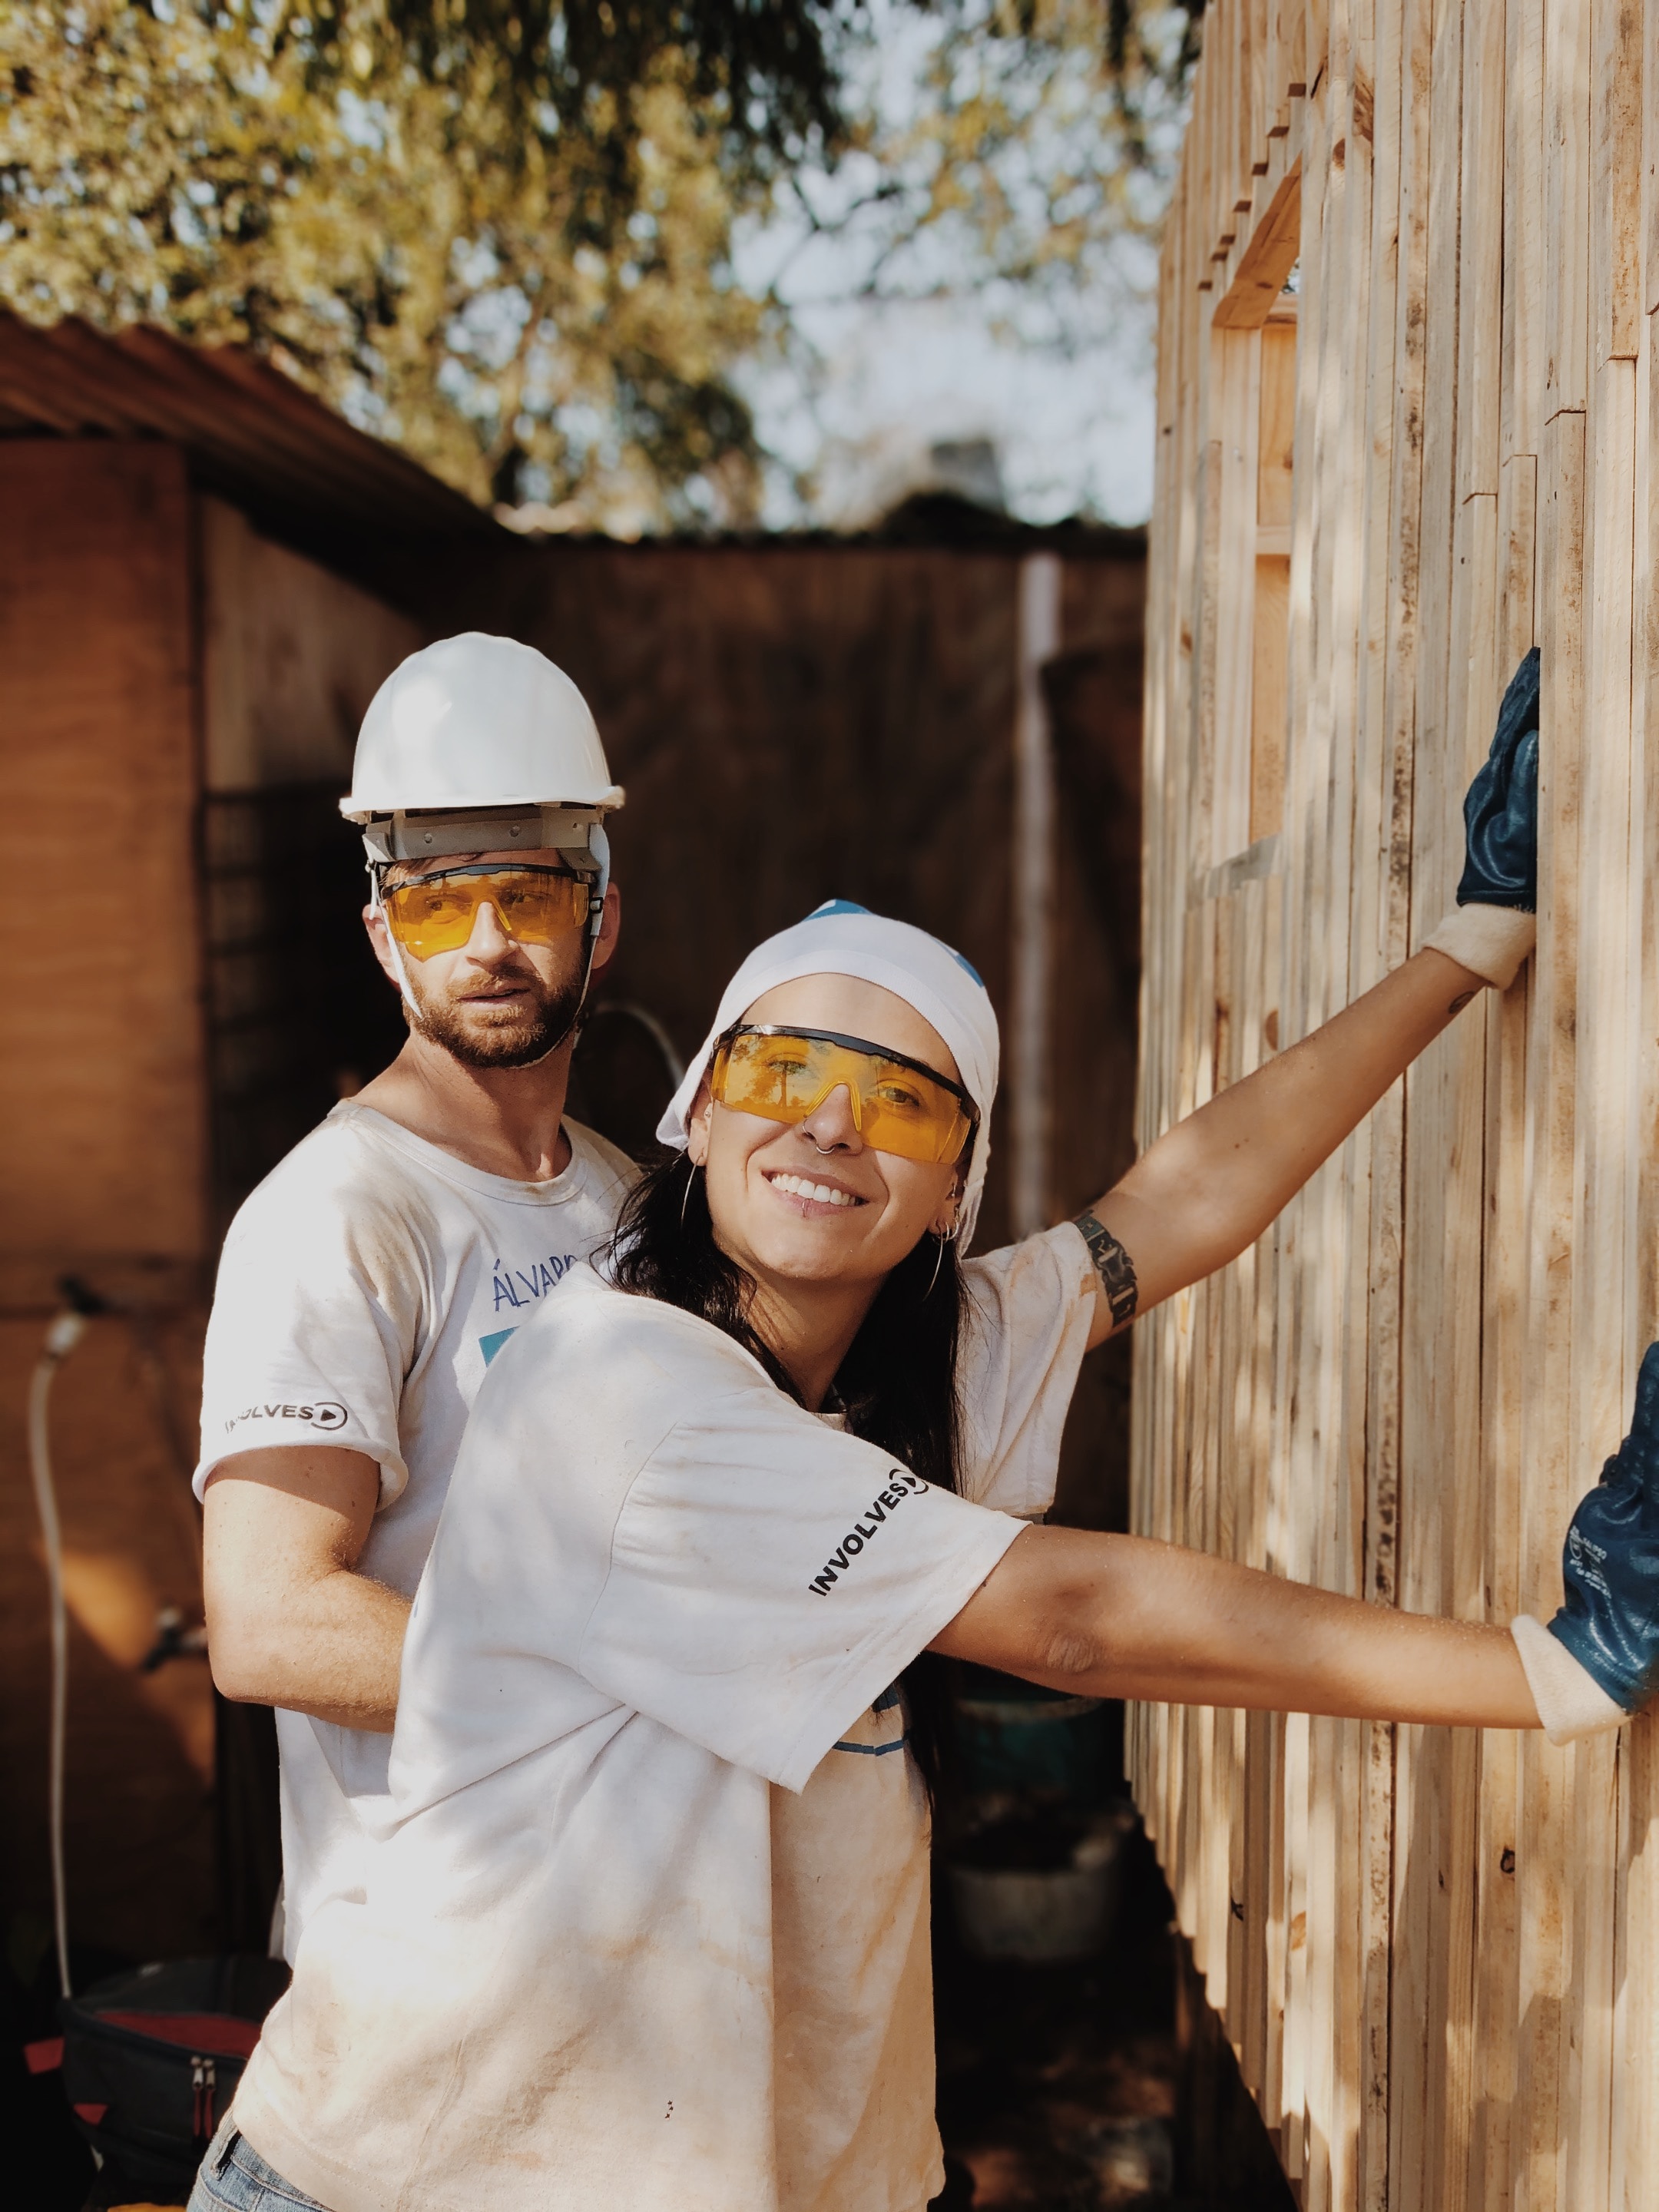 Couple with protective eye gear working on a DIY home rennovation.